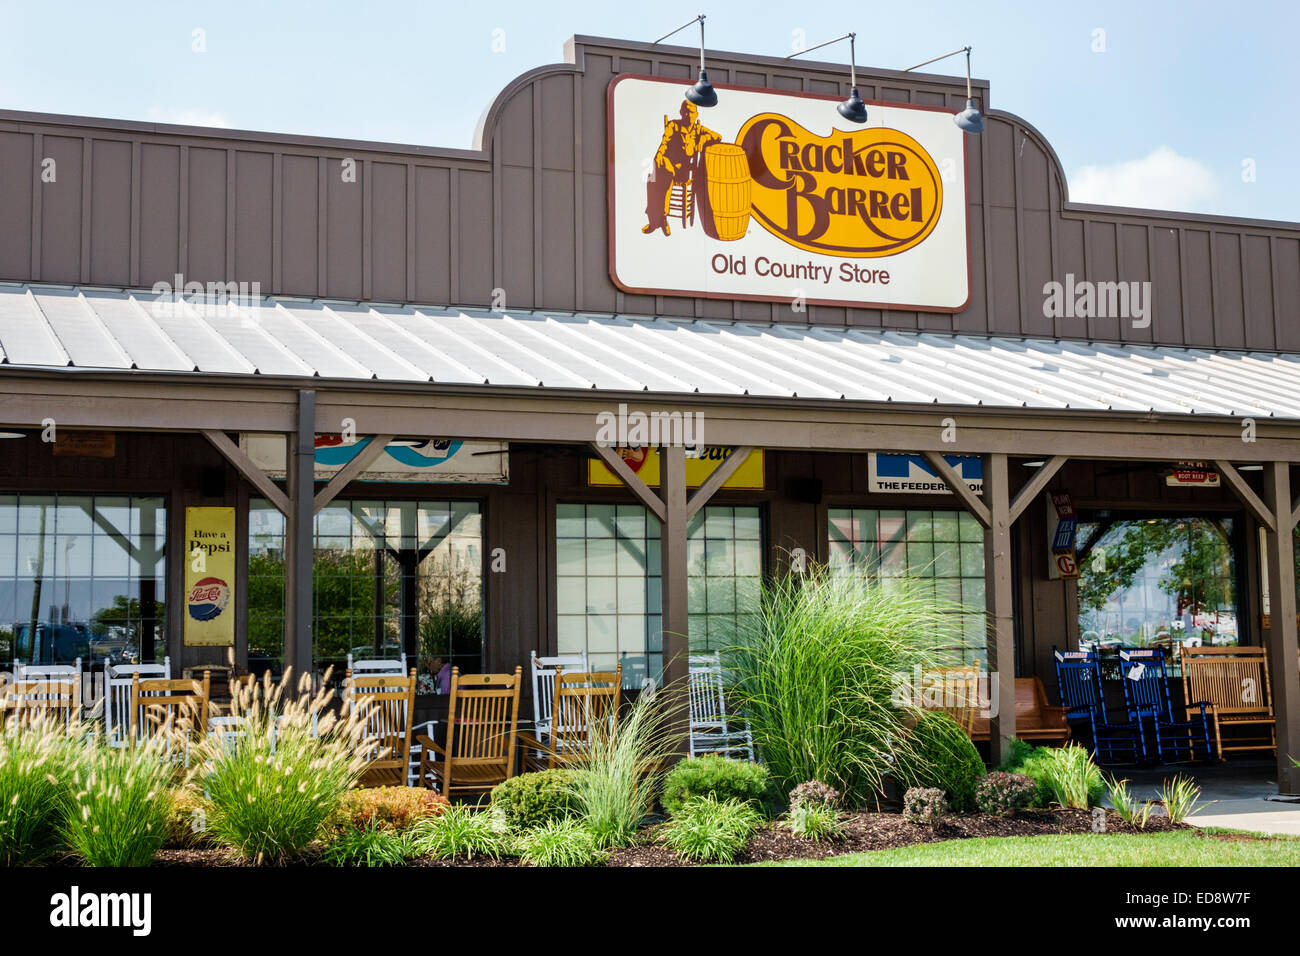 Illinois Troy,Cracker Barrel Restaurant & Old Country Store,American chain,exterior,entrance,company logo,branding,porch,rocking chair,IL140910005 Stock Photo